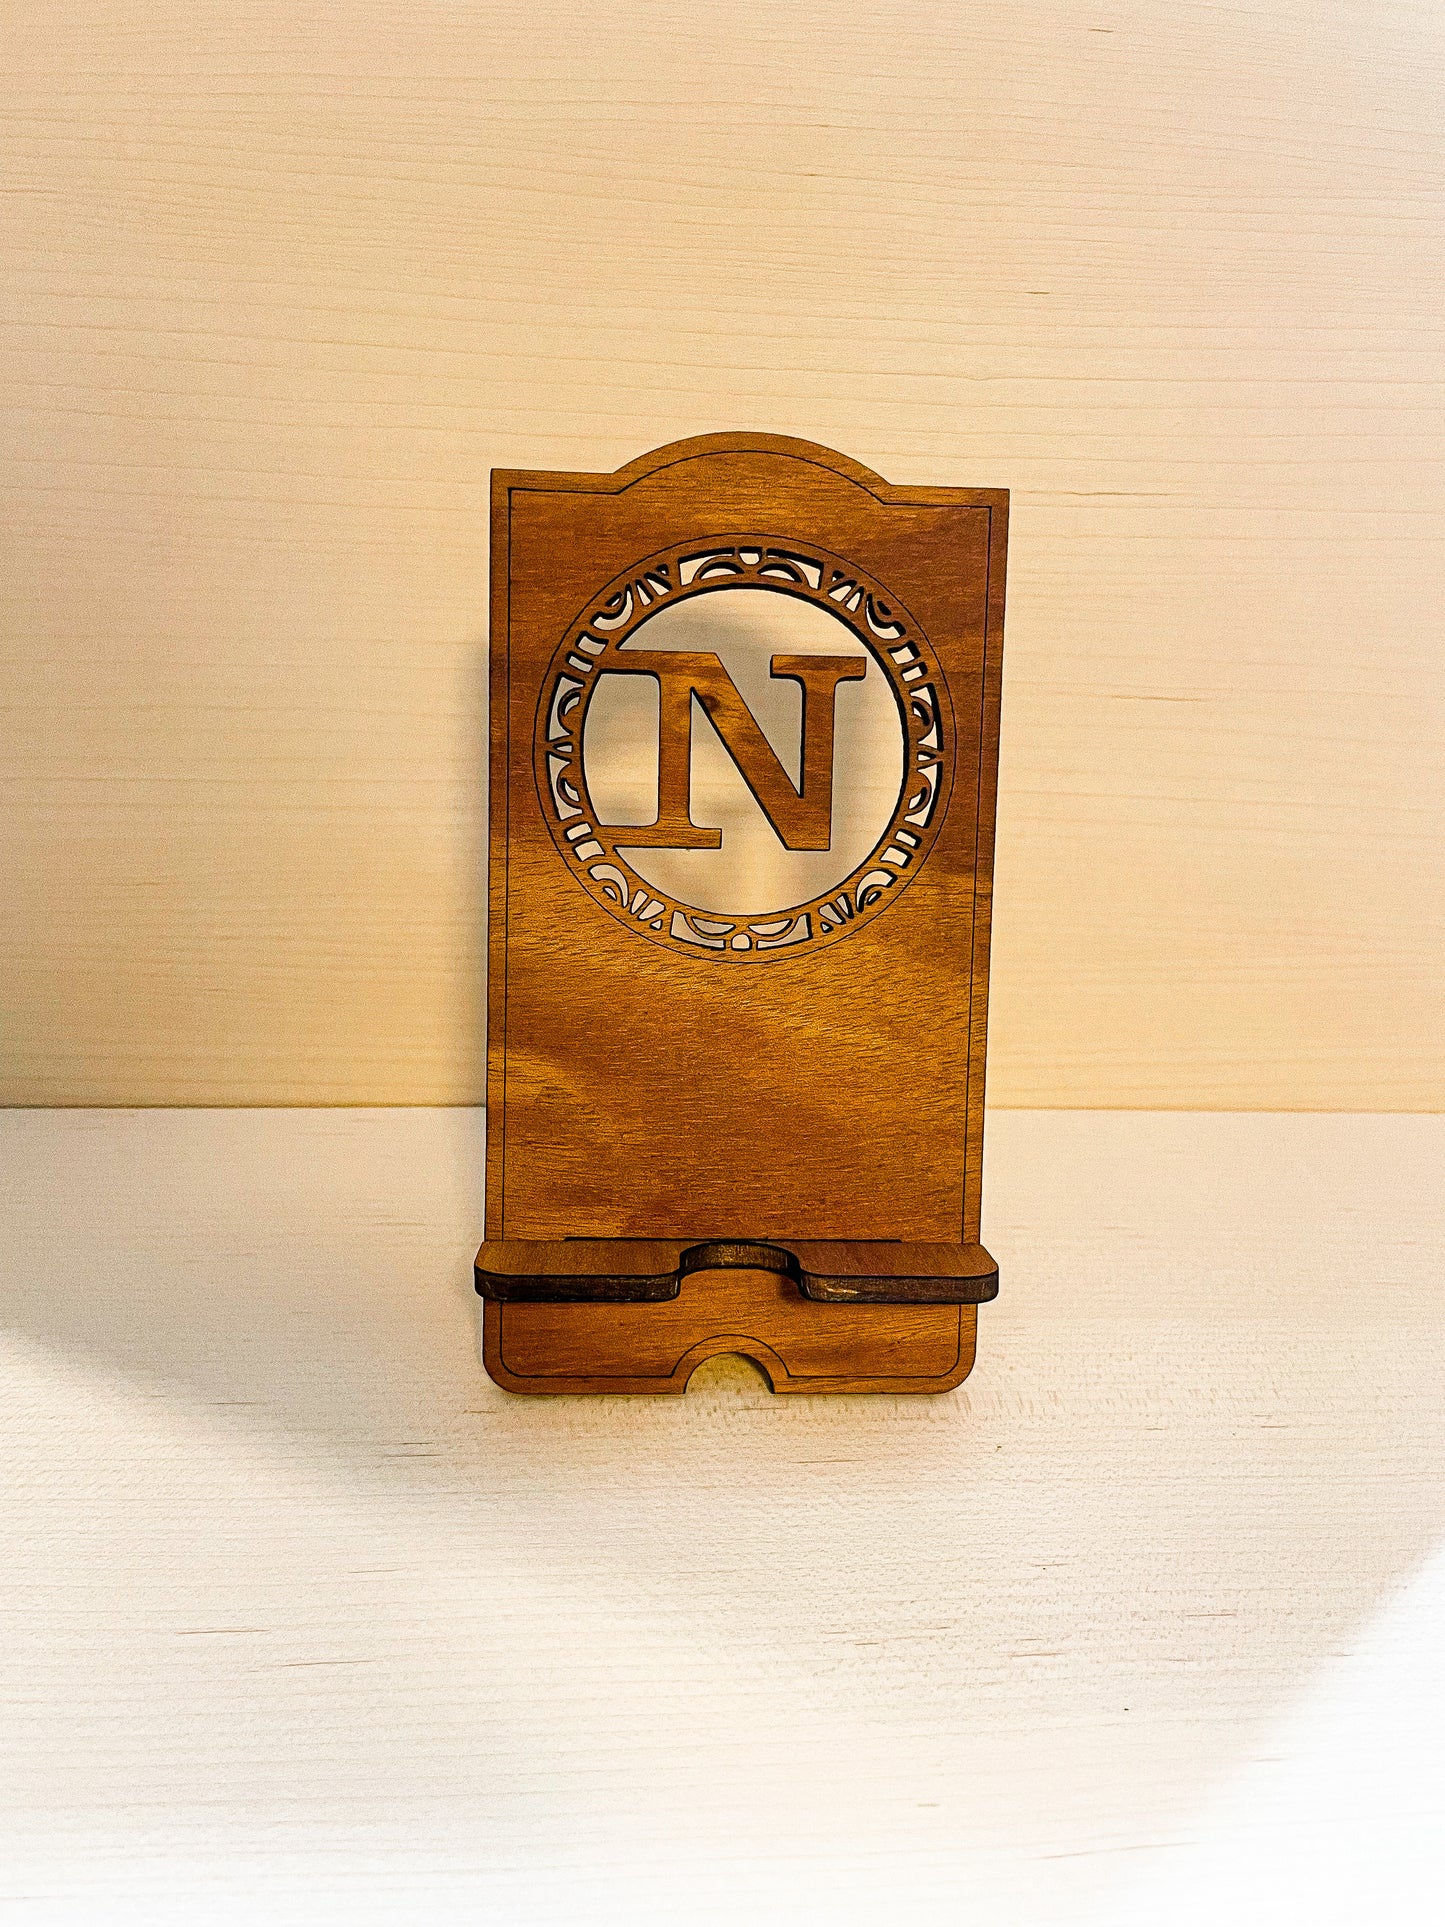 Personalized wooden phone stand. Perfect for birthdays, colleagues or as general holiday stocking stuffers | Gifts for him | Gifts for her